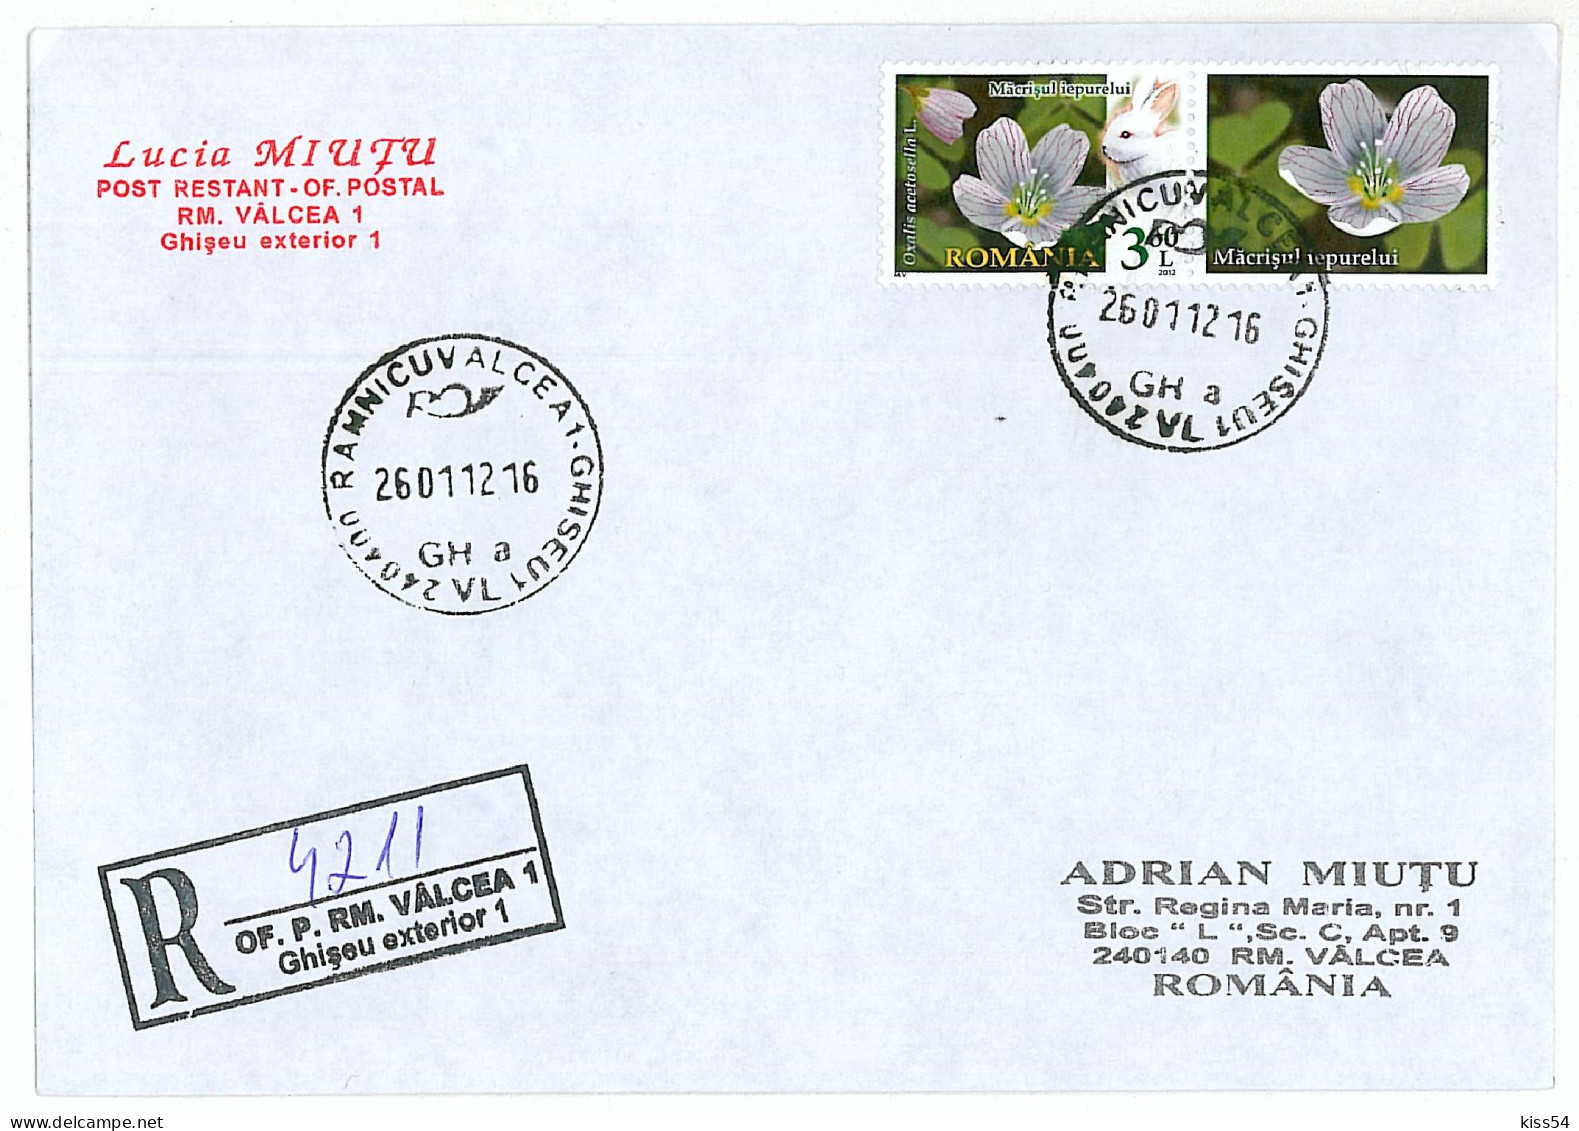 NCP 25 - 4211-a Flowers & RABBIT, Romania - Registered, Stamp With Vignette - 2012 - Covers & Documents